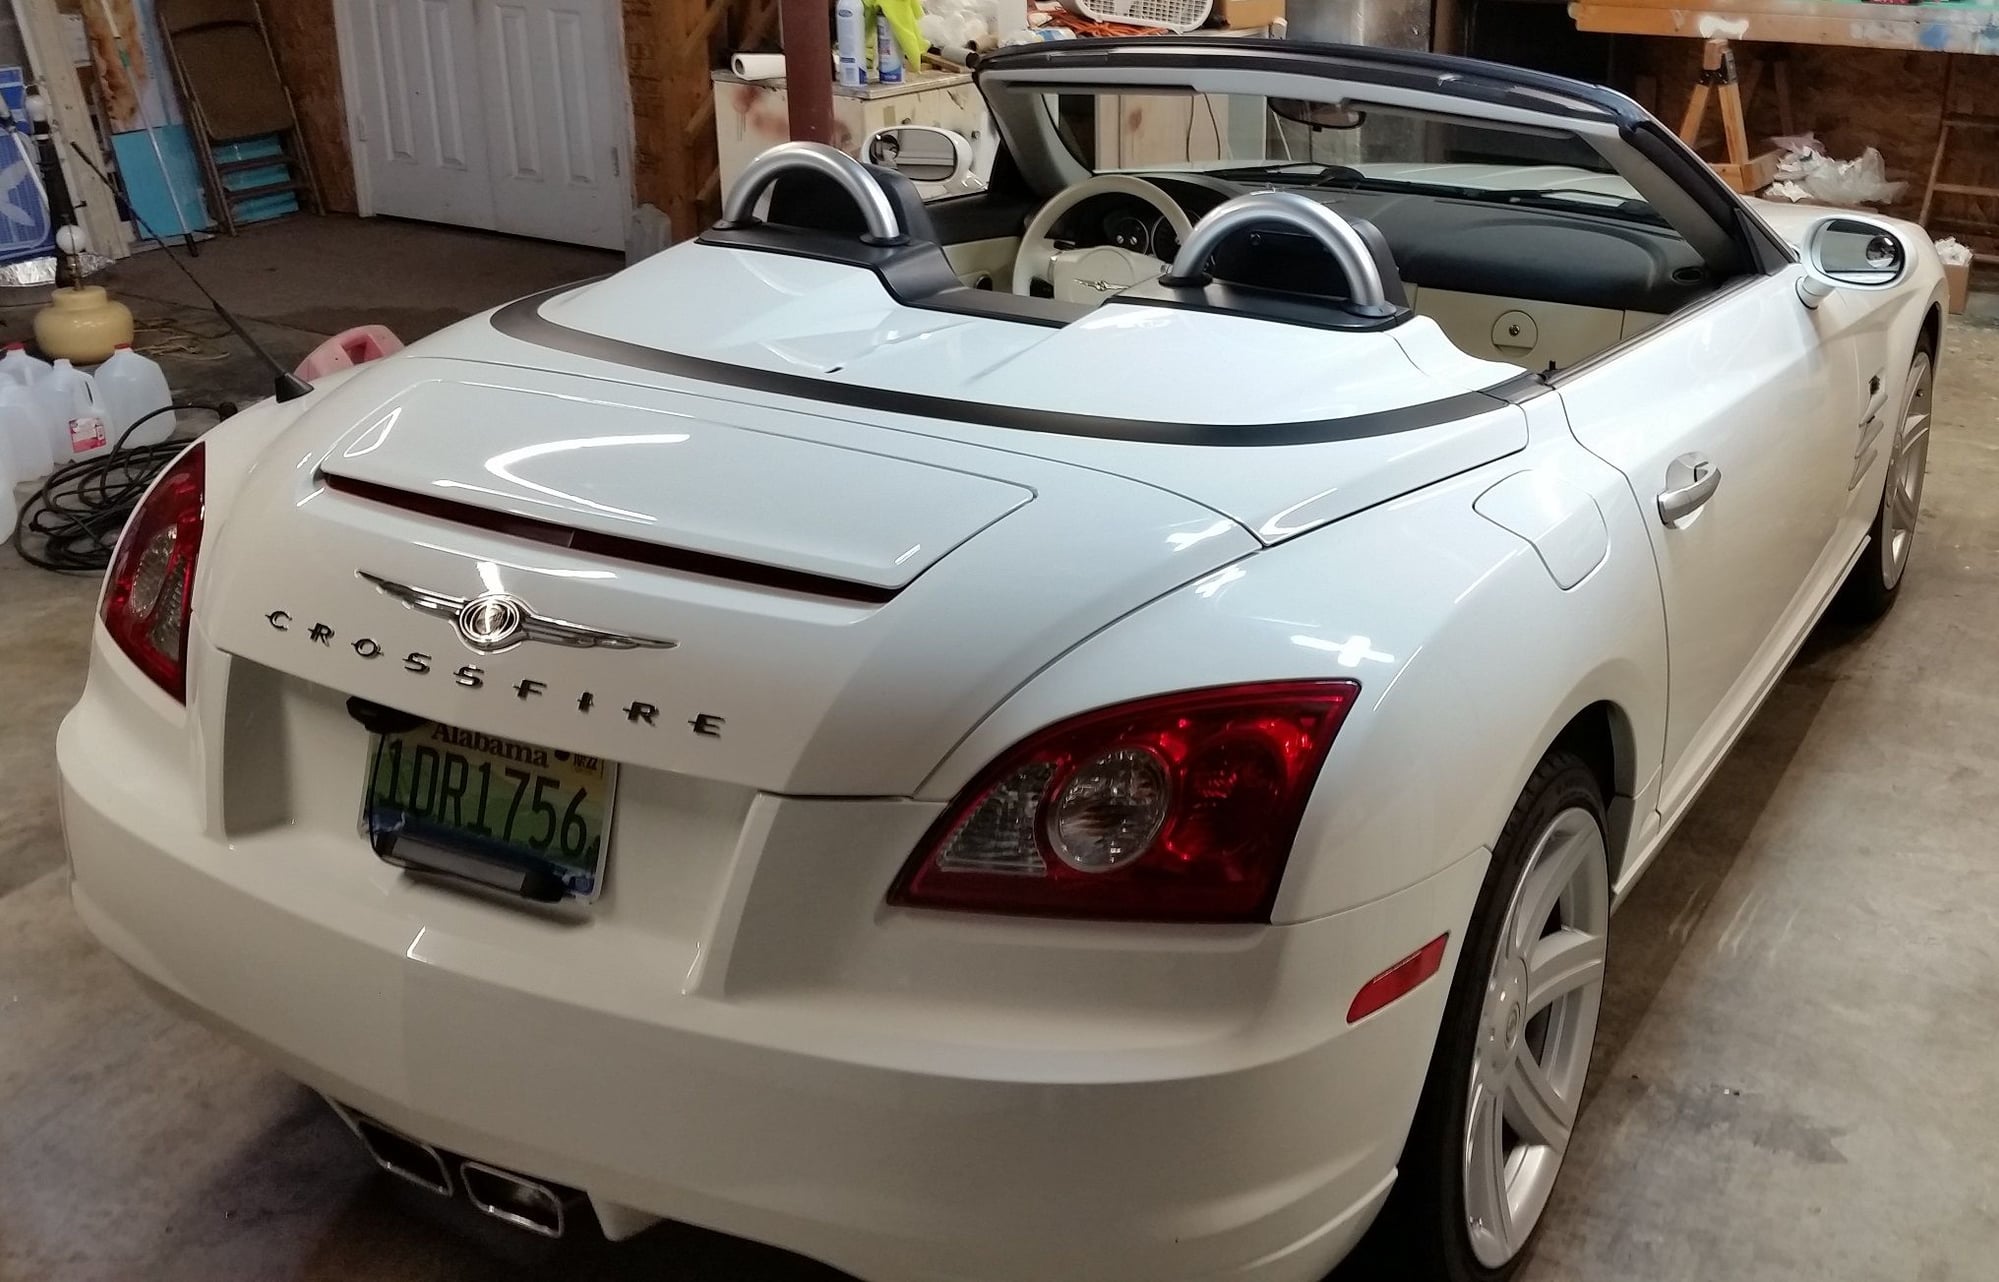 2005 Chrysler Crossfire - 2005 Chrysler Crossfire Limited Roadster, A+ condition - Used - VIN 1C3AN65L65X051677 - 45,221 Miles - 6 cyl - 2WD - Automatic - Convertible - White - Pinson, AL 35126, United States